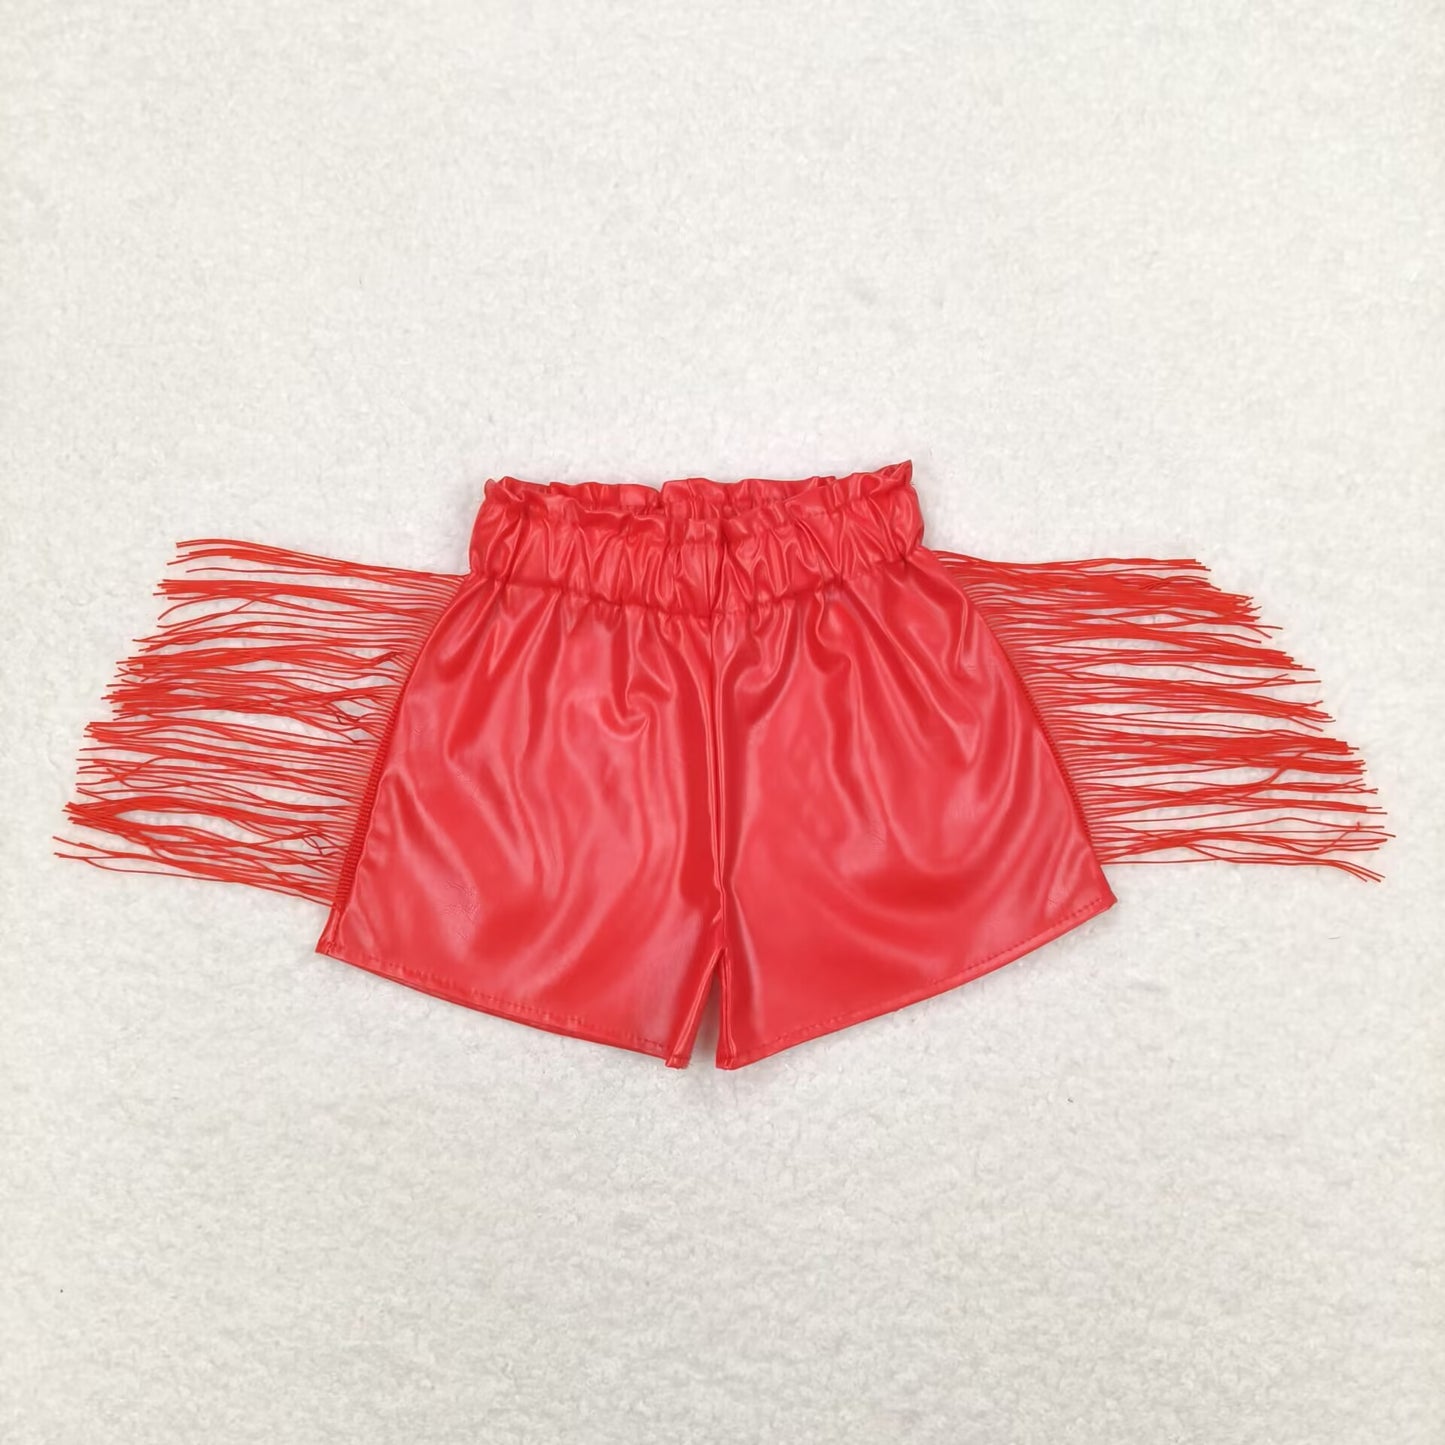 7 Colors Leather Tassel Girls Summer Shorts Sisters Wear